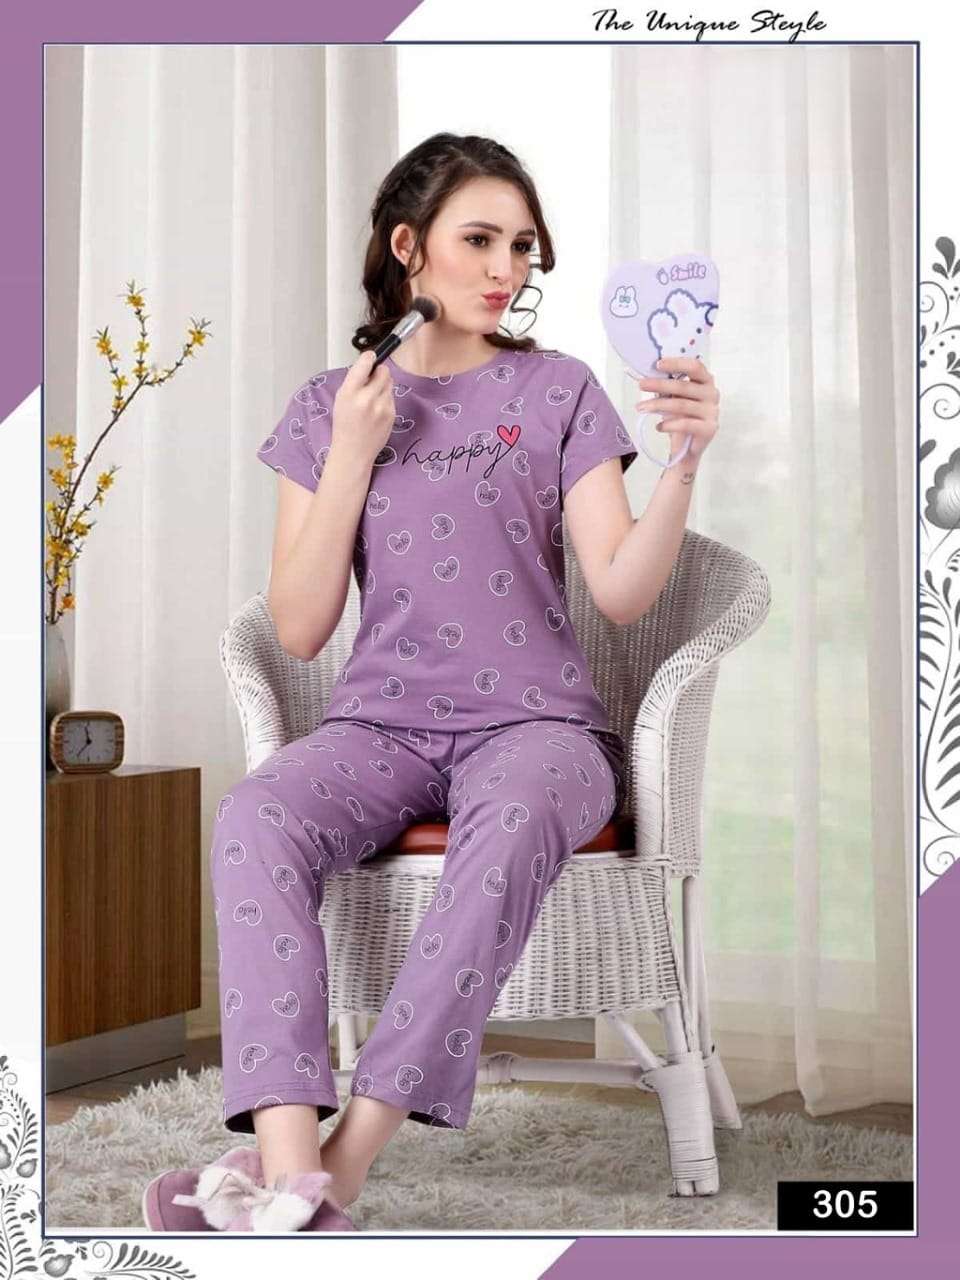 SLEEP WELL VOL 20 HOSIERY PREMIUM NIGHT SUITS BY S3FOREVER BRAND WHOLESALR AND DELER